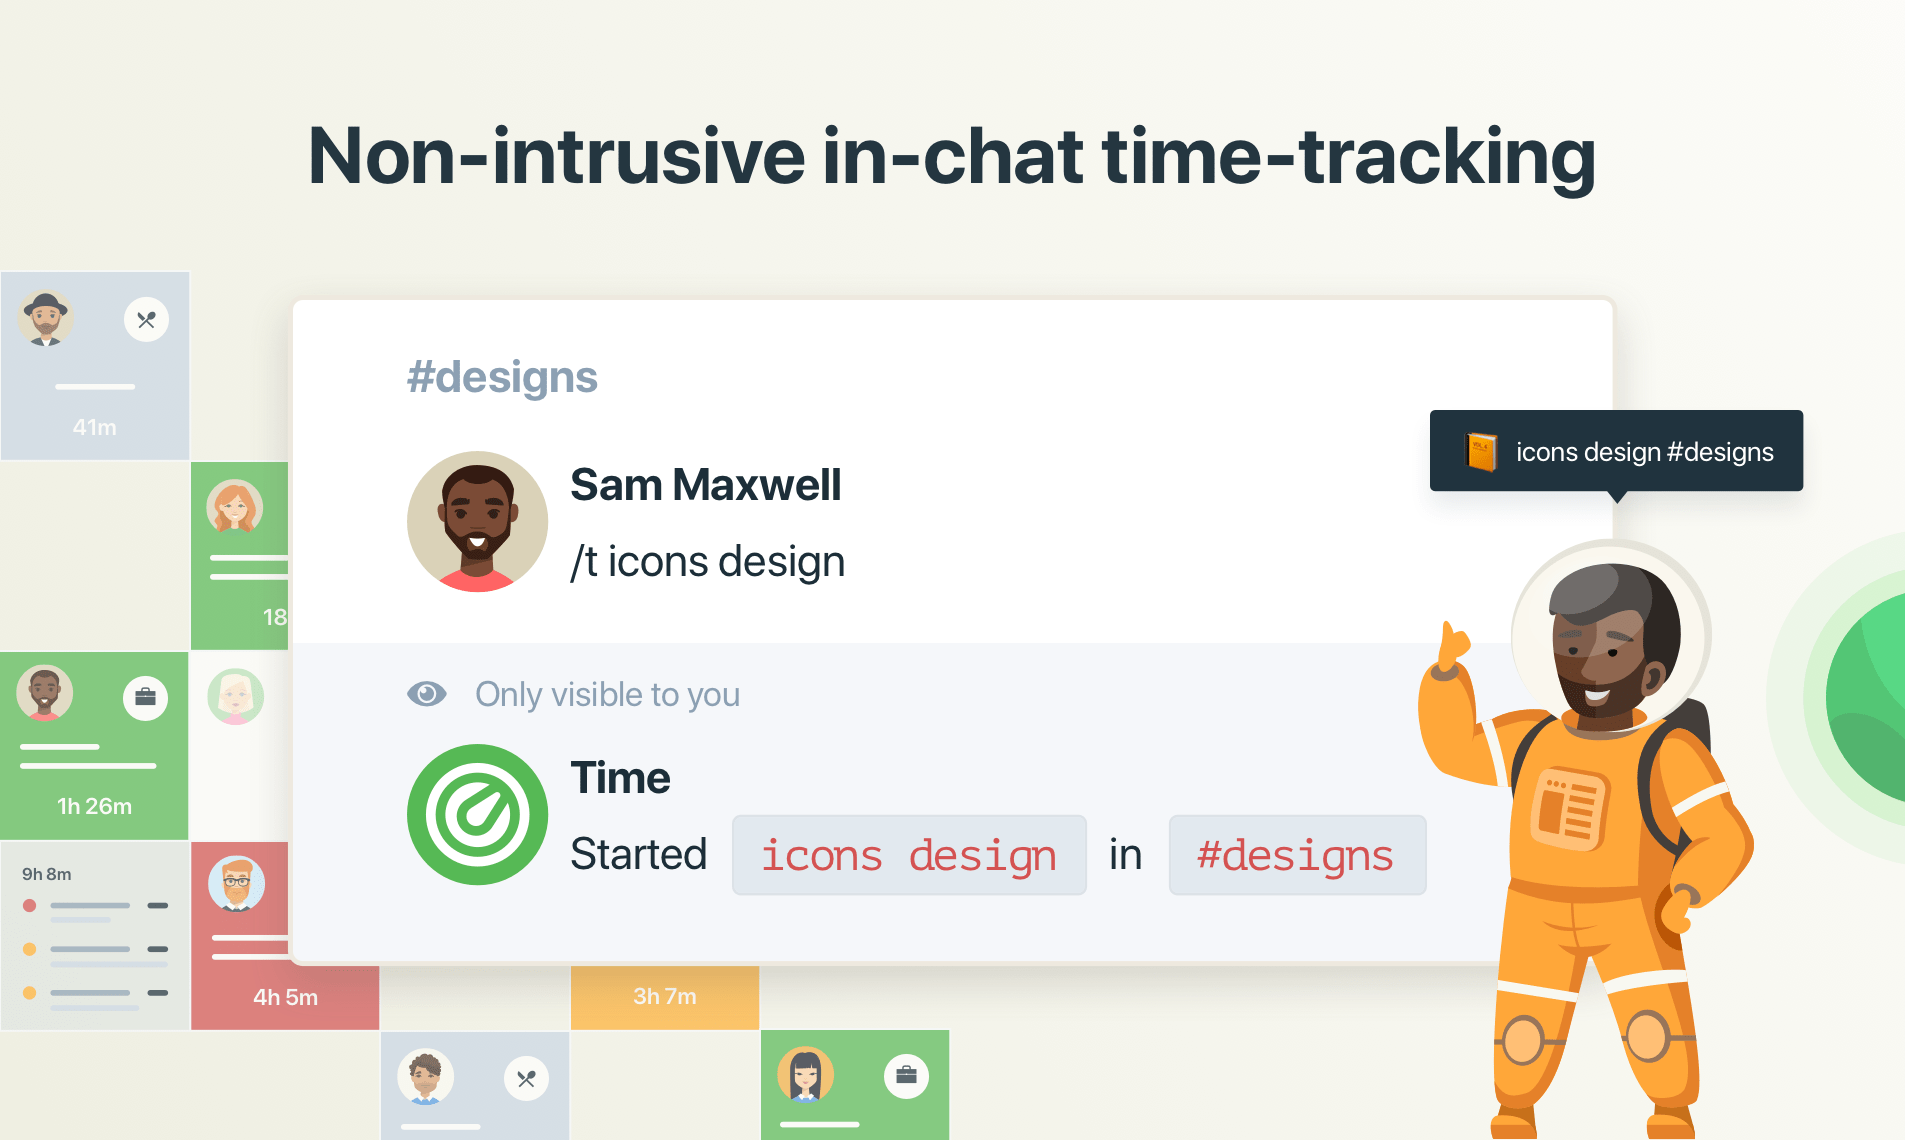 in-chat time-tracking